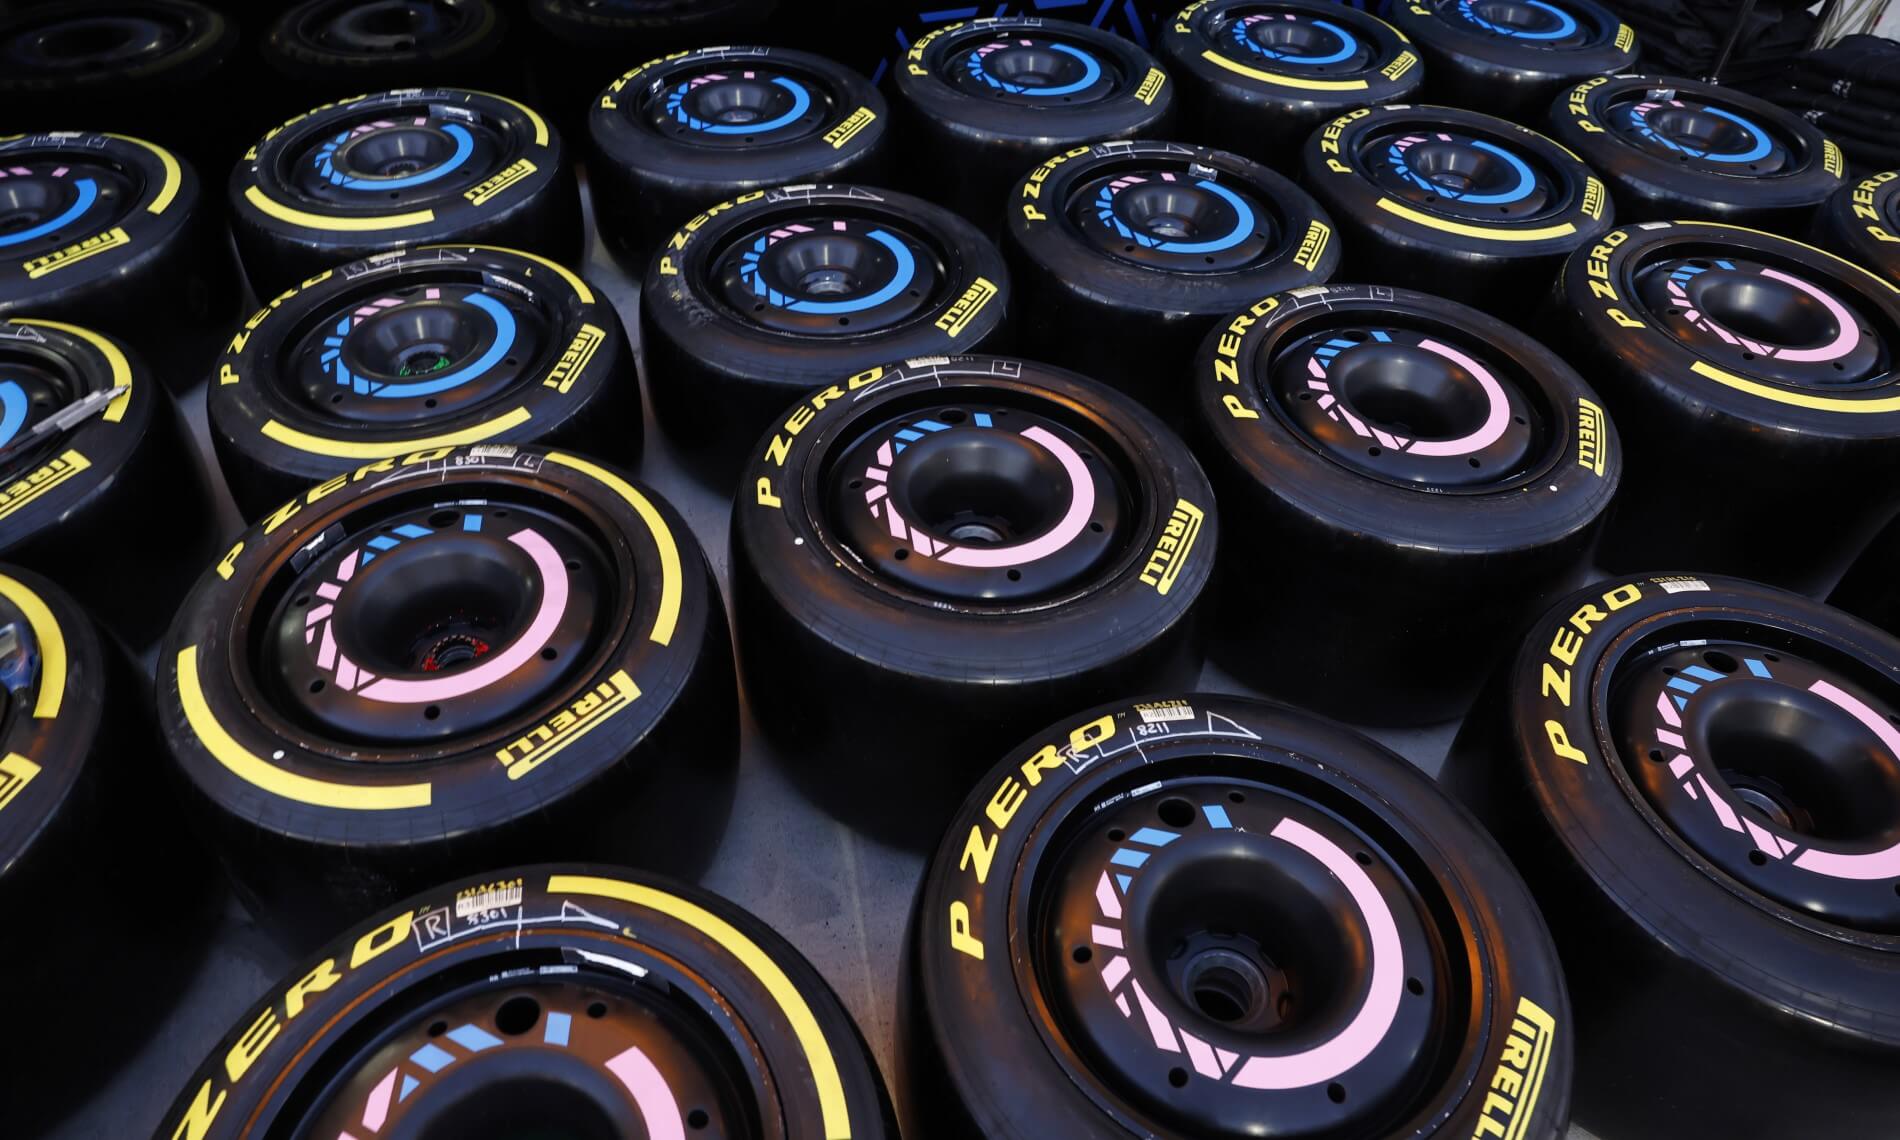 The Role of Tyre Management in Winning F1 Races